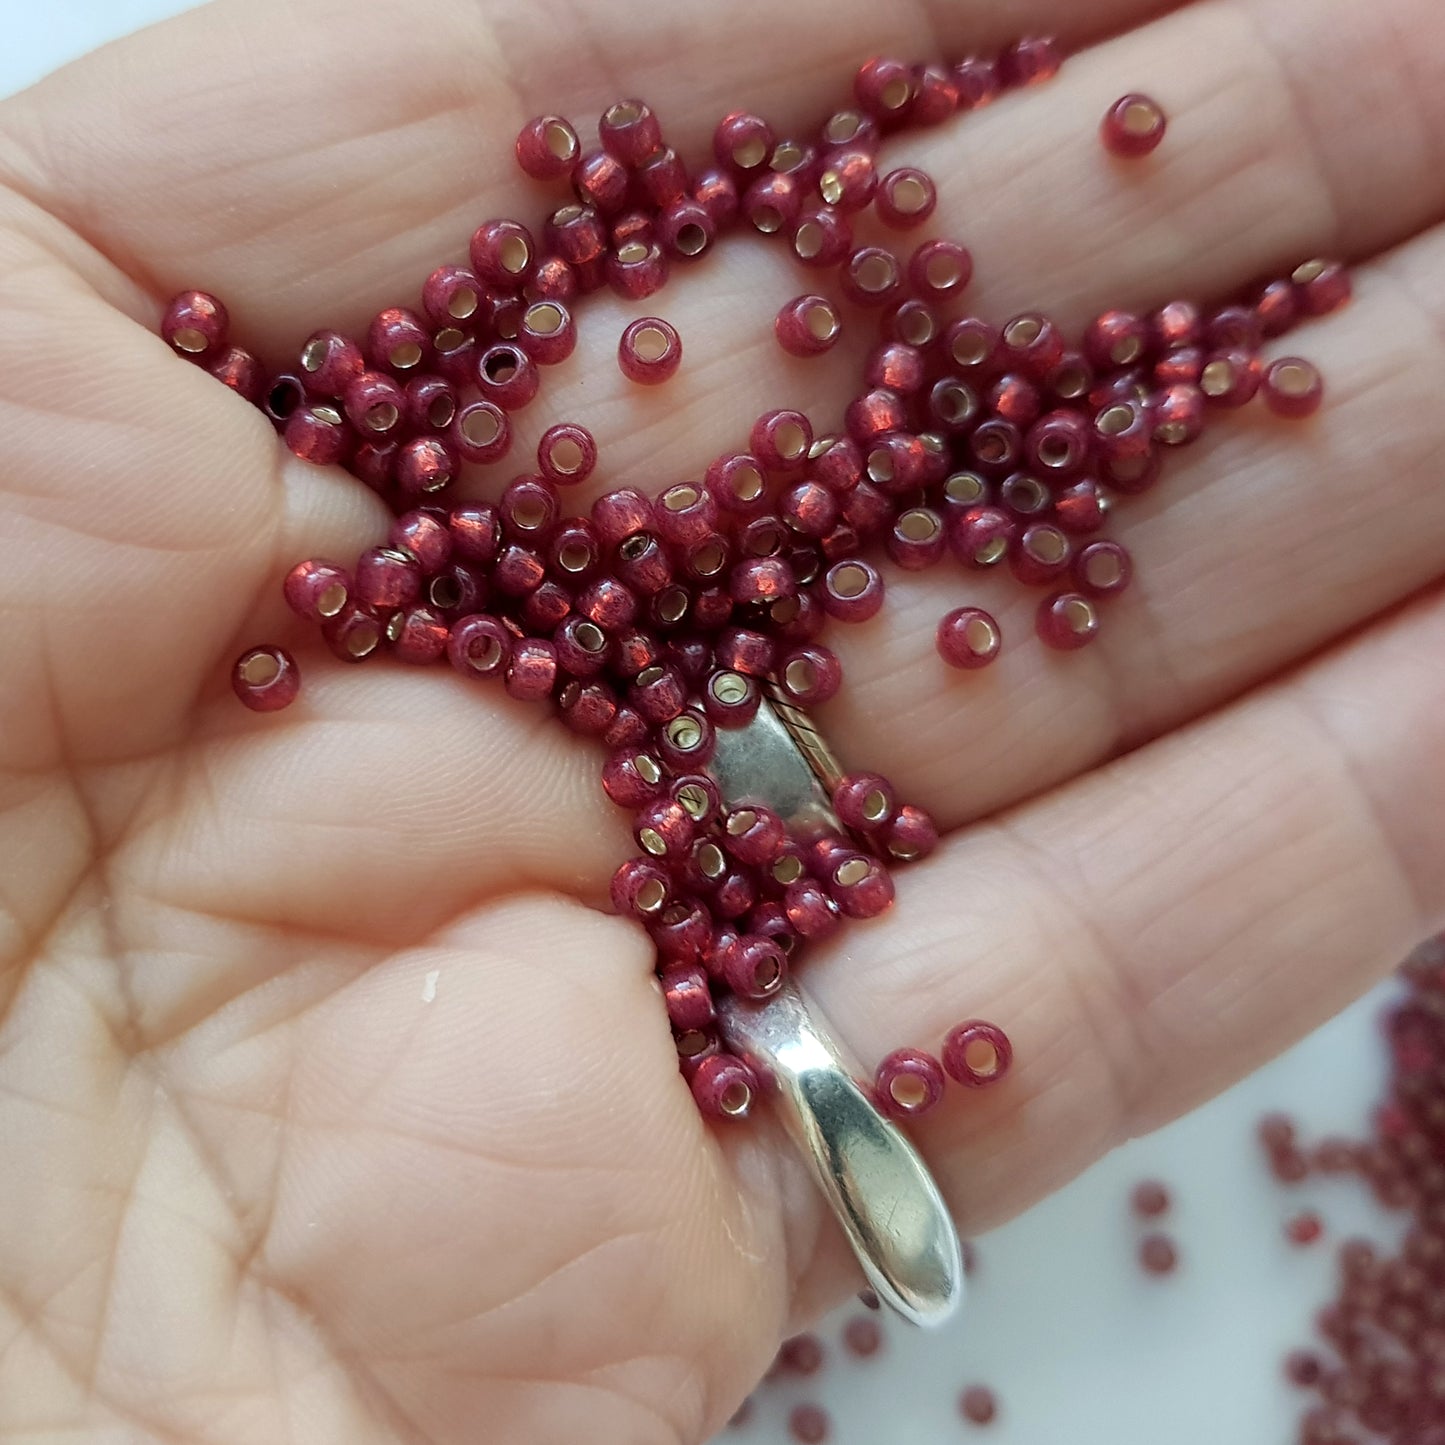 8/0 TR-2113 Milky Pomegranate Silver-Lined 10g/30g Round Toho Seed Beads - Beading Supply